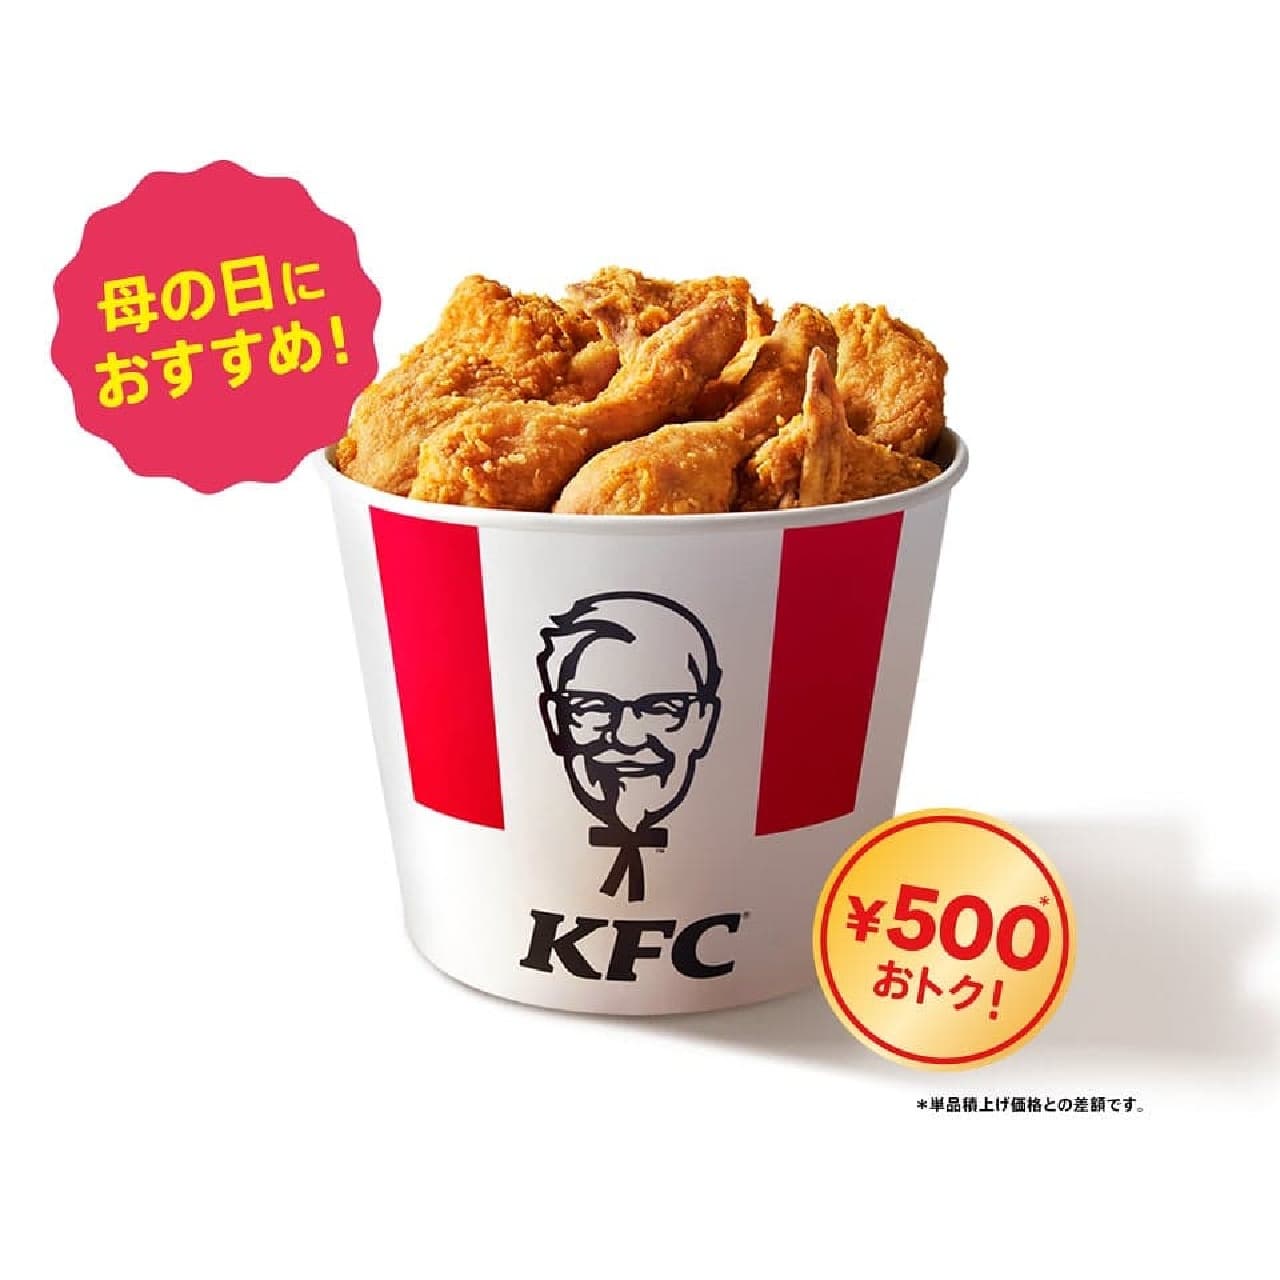 Kentucky Fried Chicken Japan to Sell "Mother's Day 9 Piece Barrel" for 3 Days Starting May 10, Special Set for Family Fun Image 2